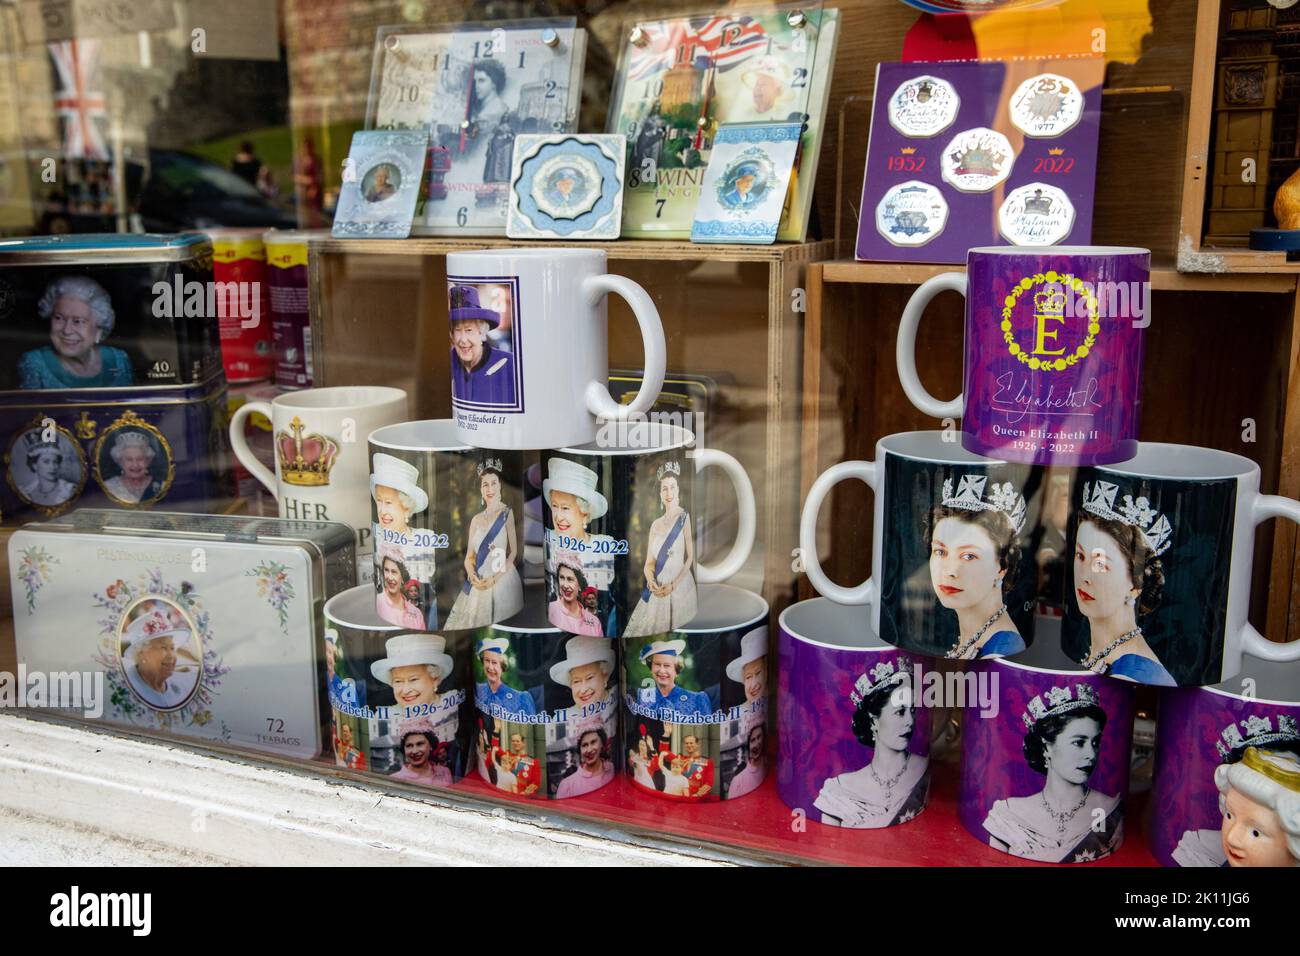 Windsor, UK. 14th September, 2022. Souvenirs of Queen Elizabeth II are displayed in a shop window. Queen Elizabeth II, the UK's longest-serving monarch, died at Balmoral aged 96 on 8th September after a reign lasting 70 years and will be buried in the King George VI memorial chapel in Windsor following a state funeral in Westminster Abbey on 19th September. Credit: Mark Kerrison/Alamy Live News Stock Photo